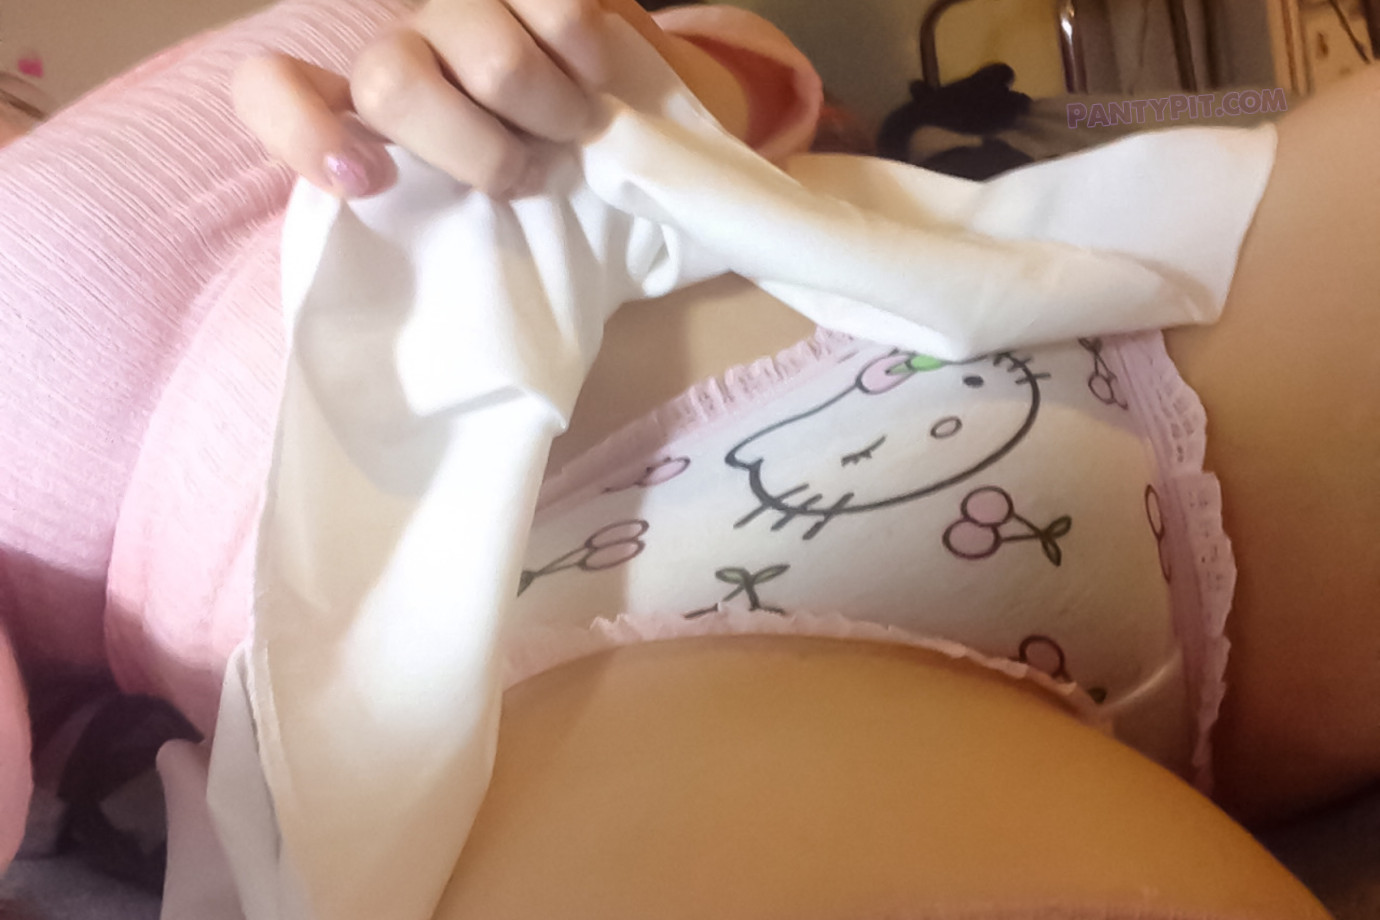 Amateur girls in Hello Kitty panties pic